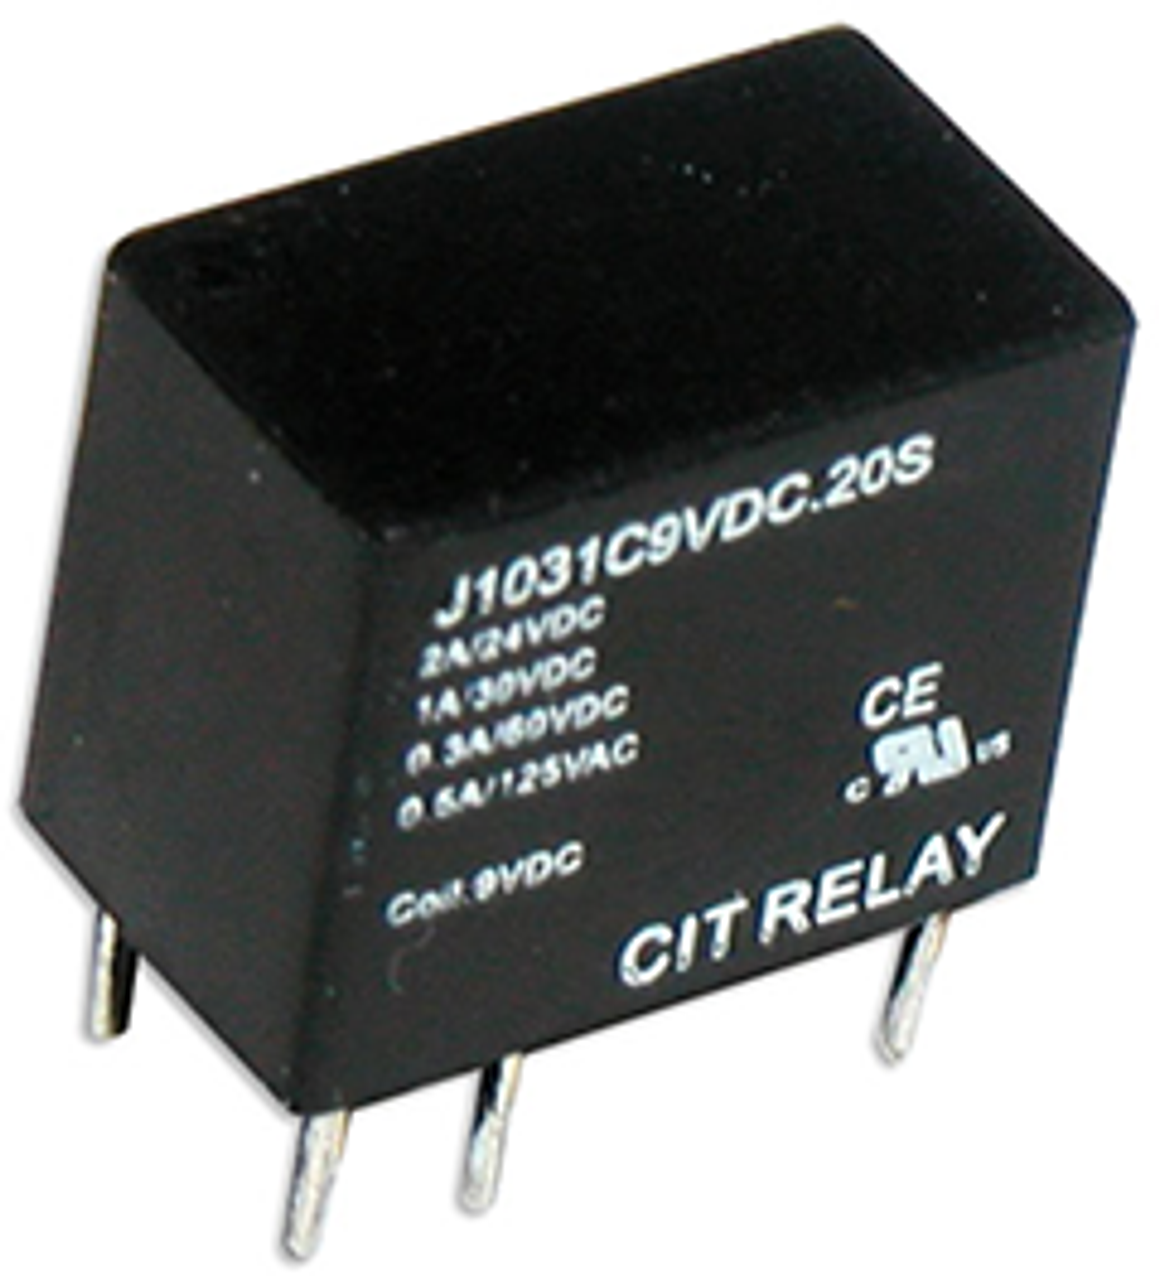 CIT Relay and Switch J1031C3VDC.20S Signal Relays